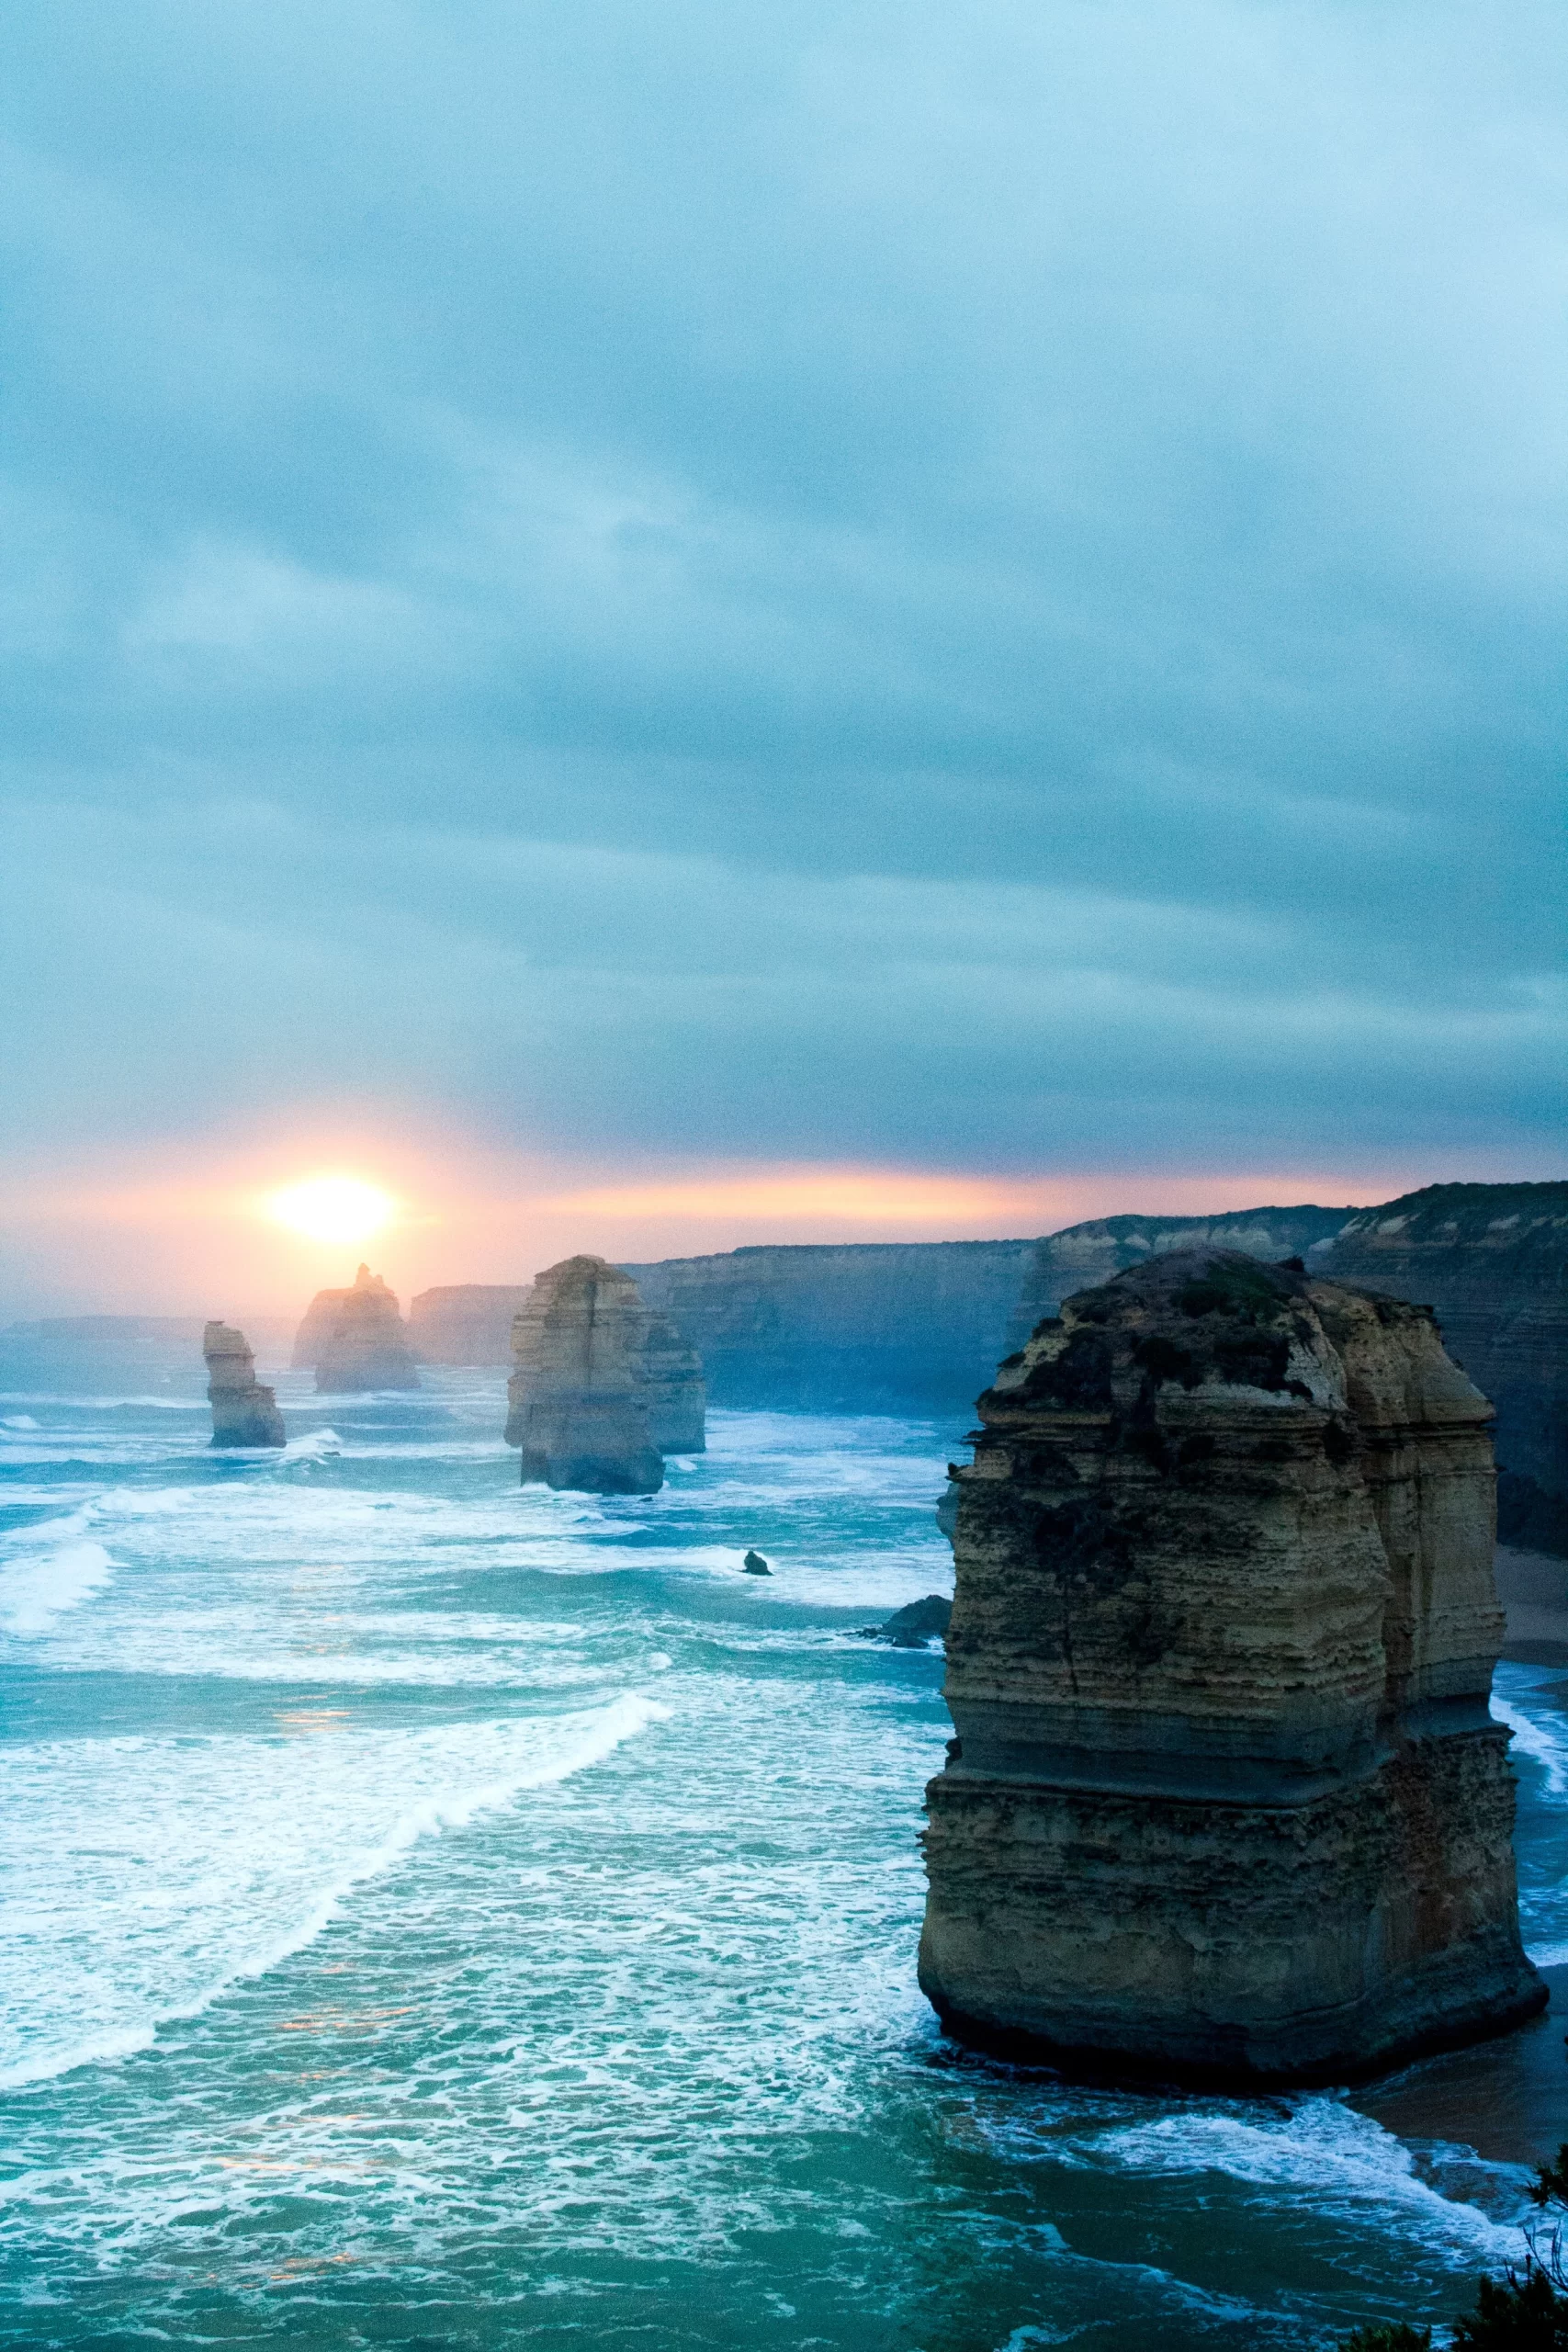 Twelve Apostles, Australia Published on July 22, 2017 Canon, EOS 1000D Free to use under the Unsplash License While traveling the Great Ocean Road I had the chance to live one of the most beautiful sunsets in the world